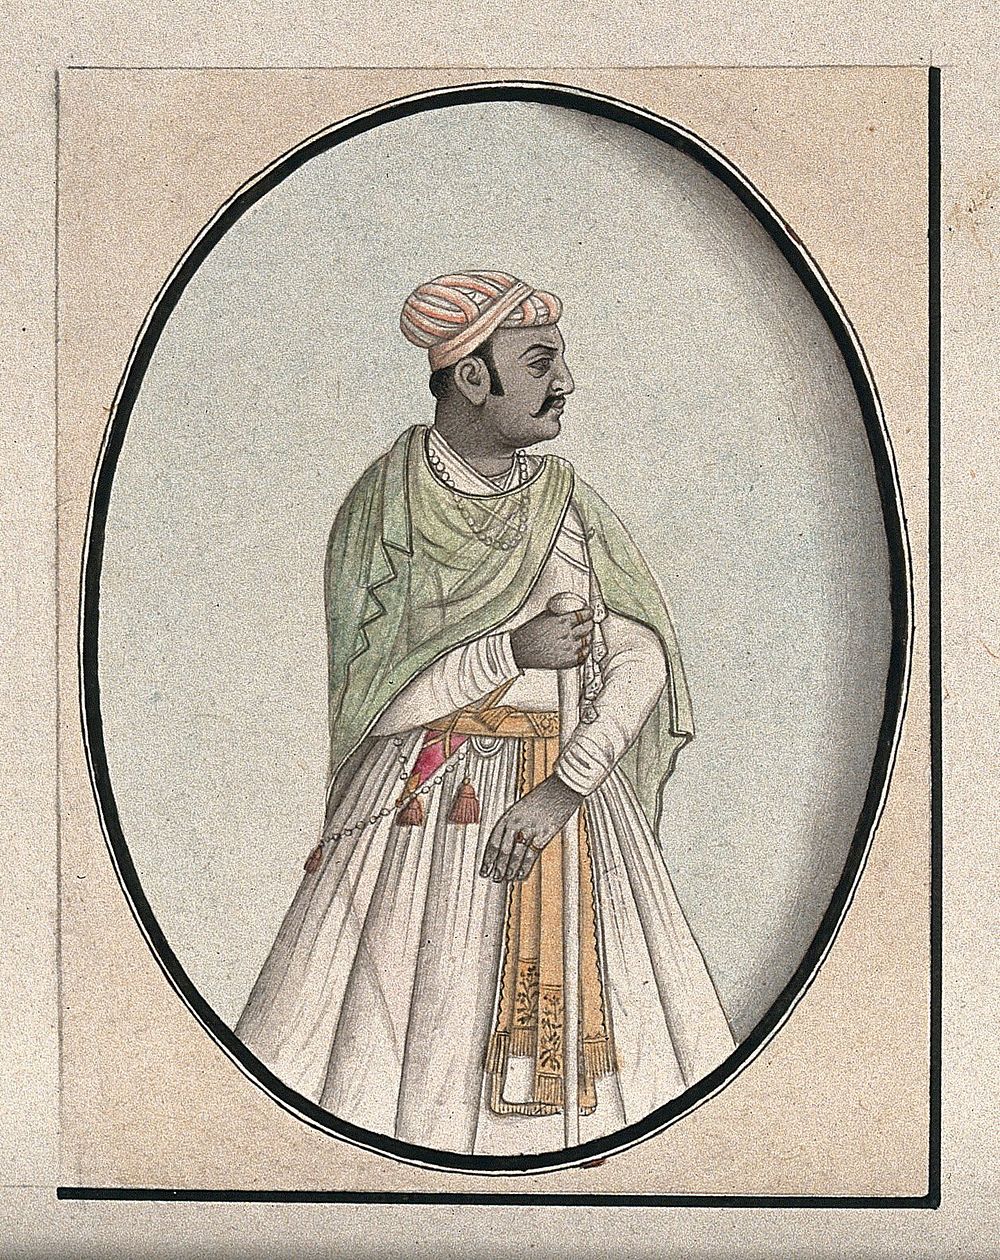 A Mughal courtier with a green scarf draped around his shoulders, holding a staff. Watercolour drawing by an Indian artist.